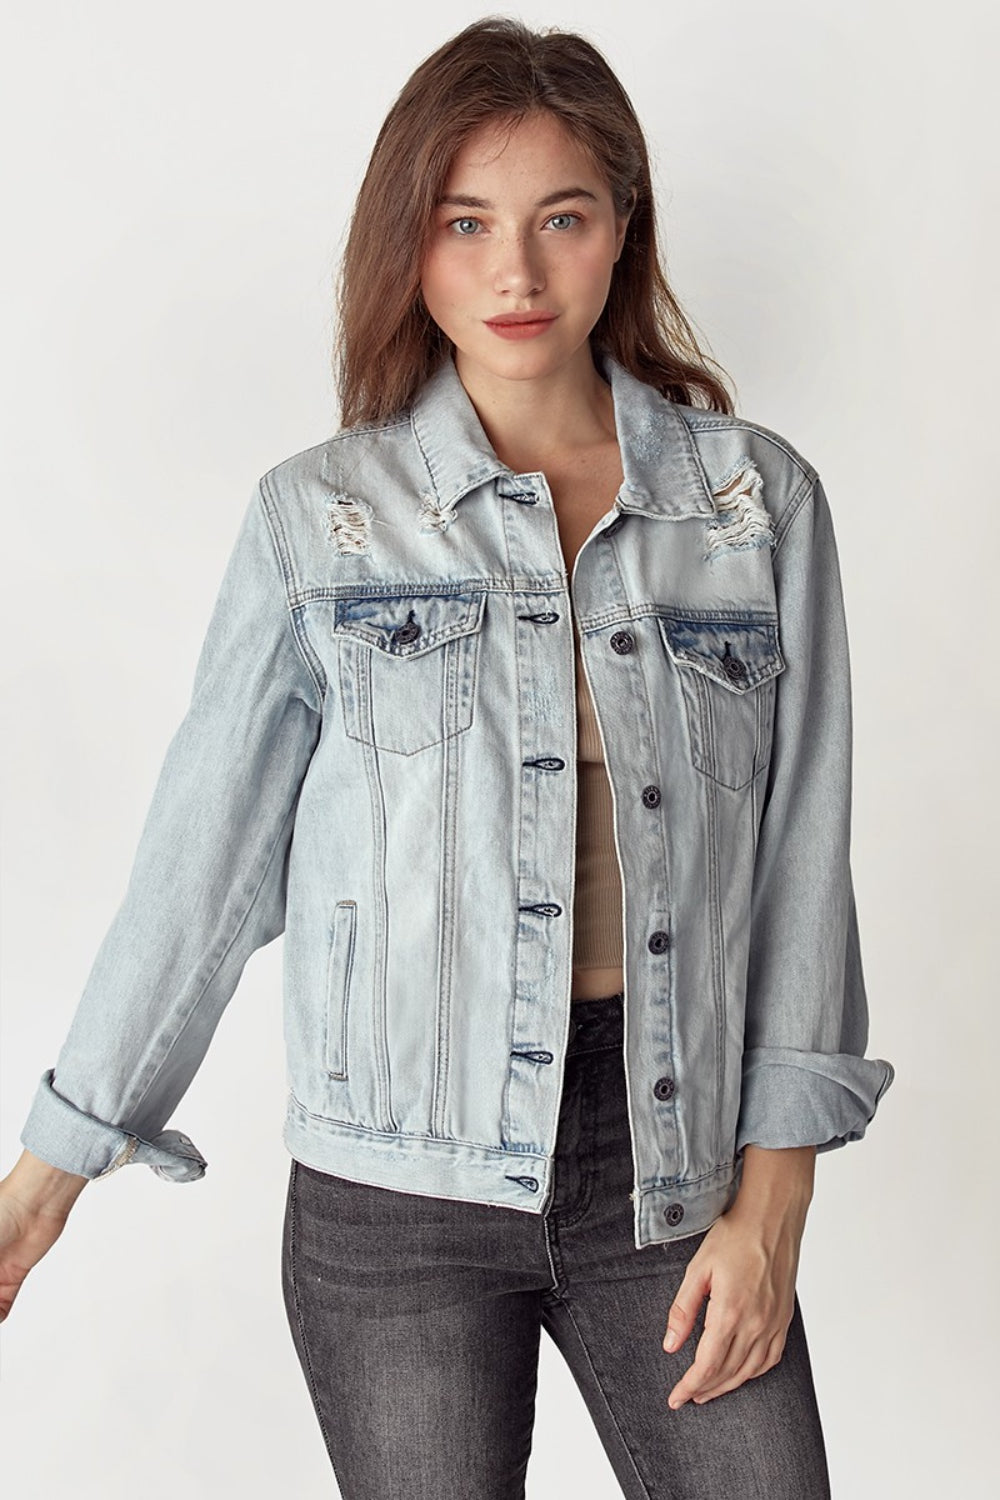 RISEN Relaxed Fit Vintage Jean Jacket - Inspired Eye Boutique